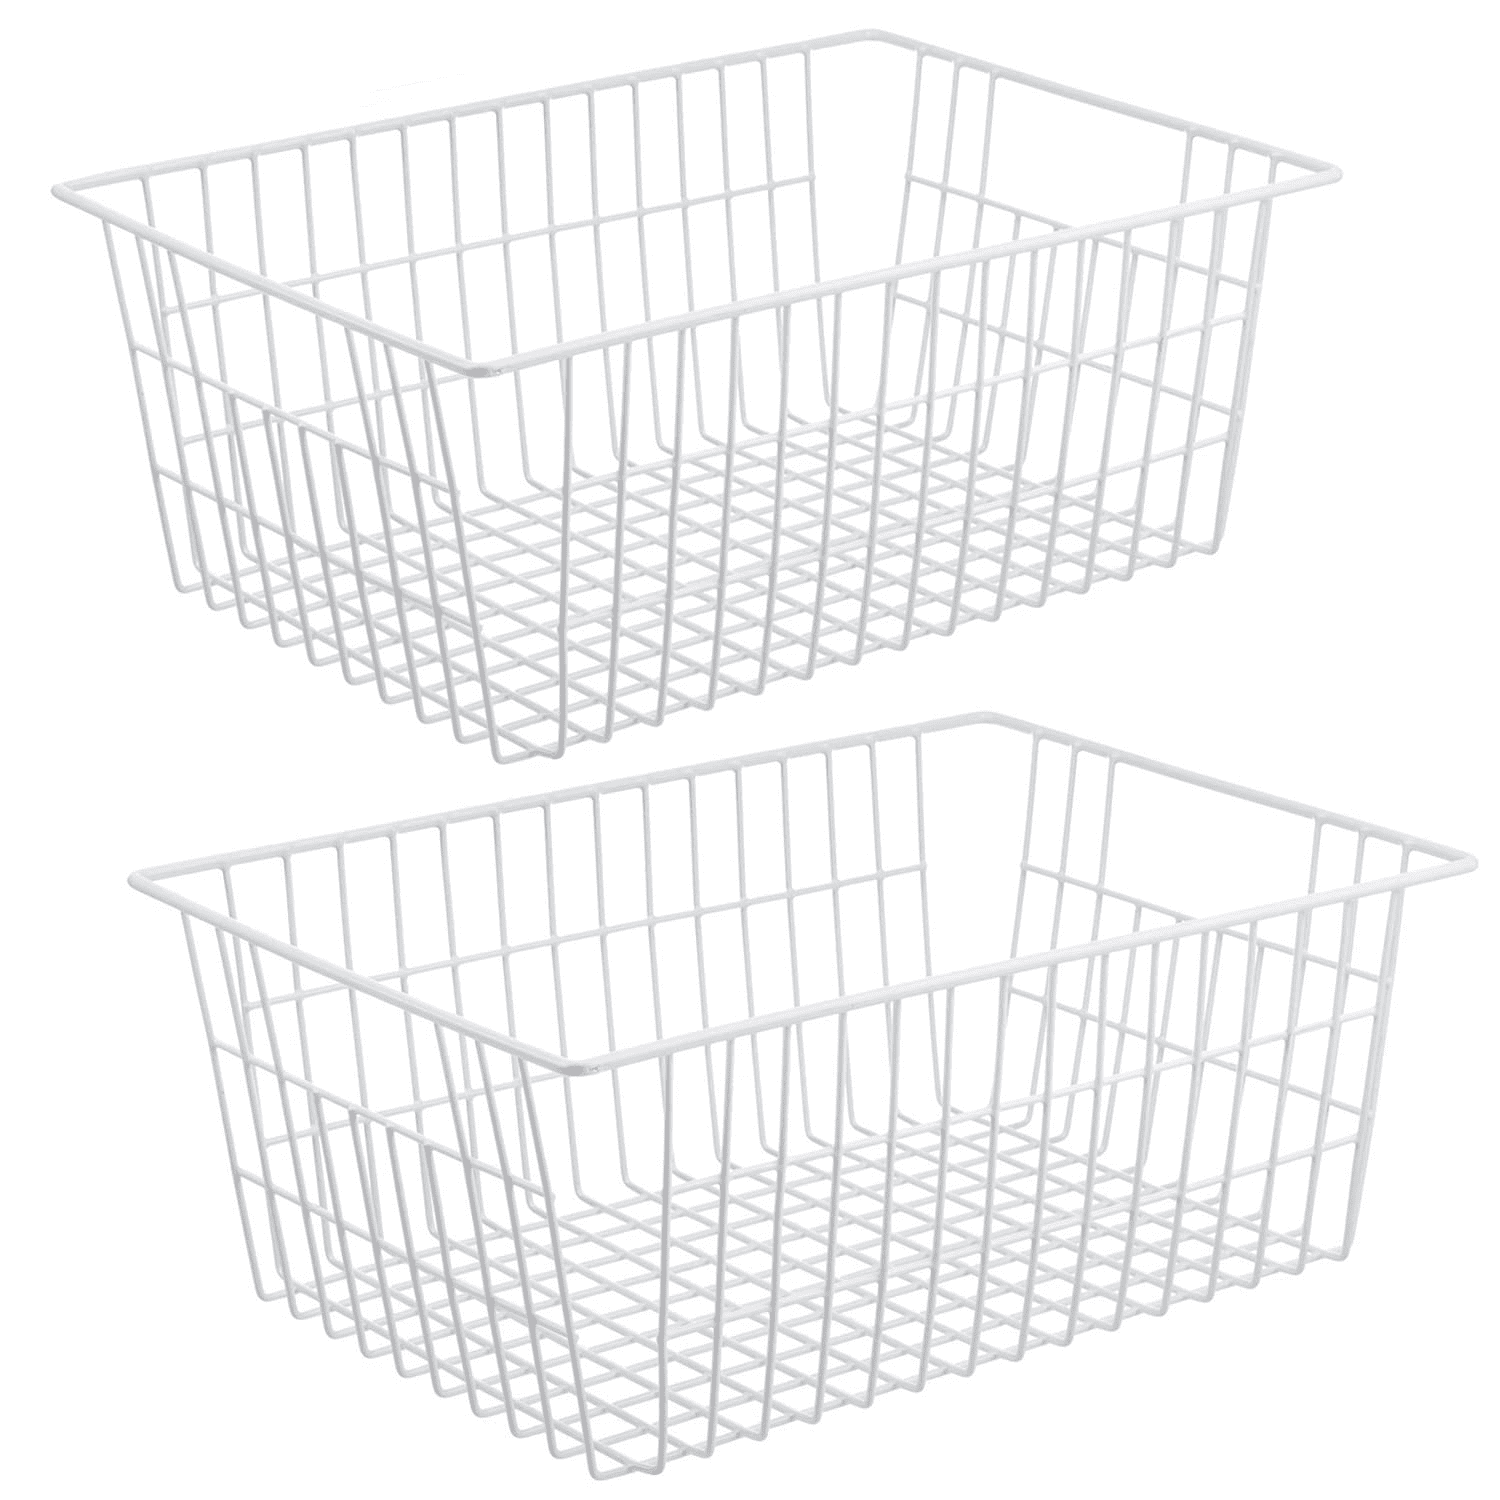 Closets Homics 2 Pack Freezer Baskets Wire Storage Baskets Organizer Bins for Household Pantry and Bedroom Cabinets Refrigerator Metal Basket with Handles for Kitchen 